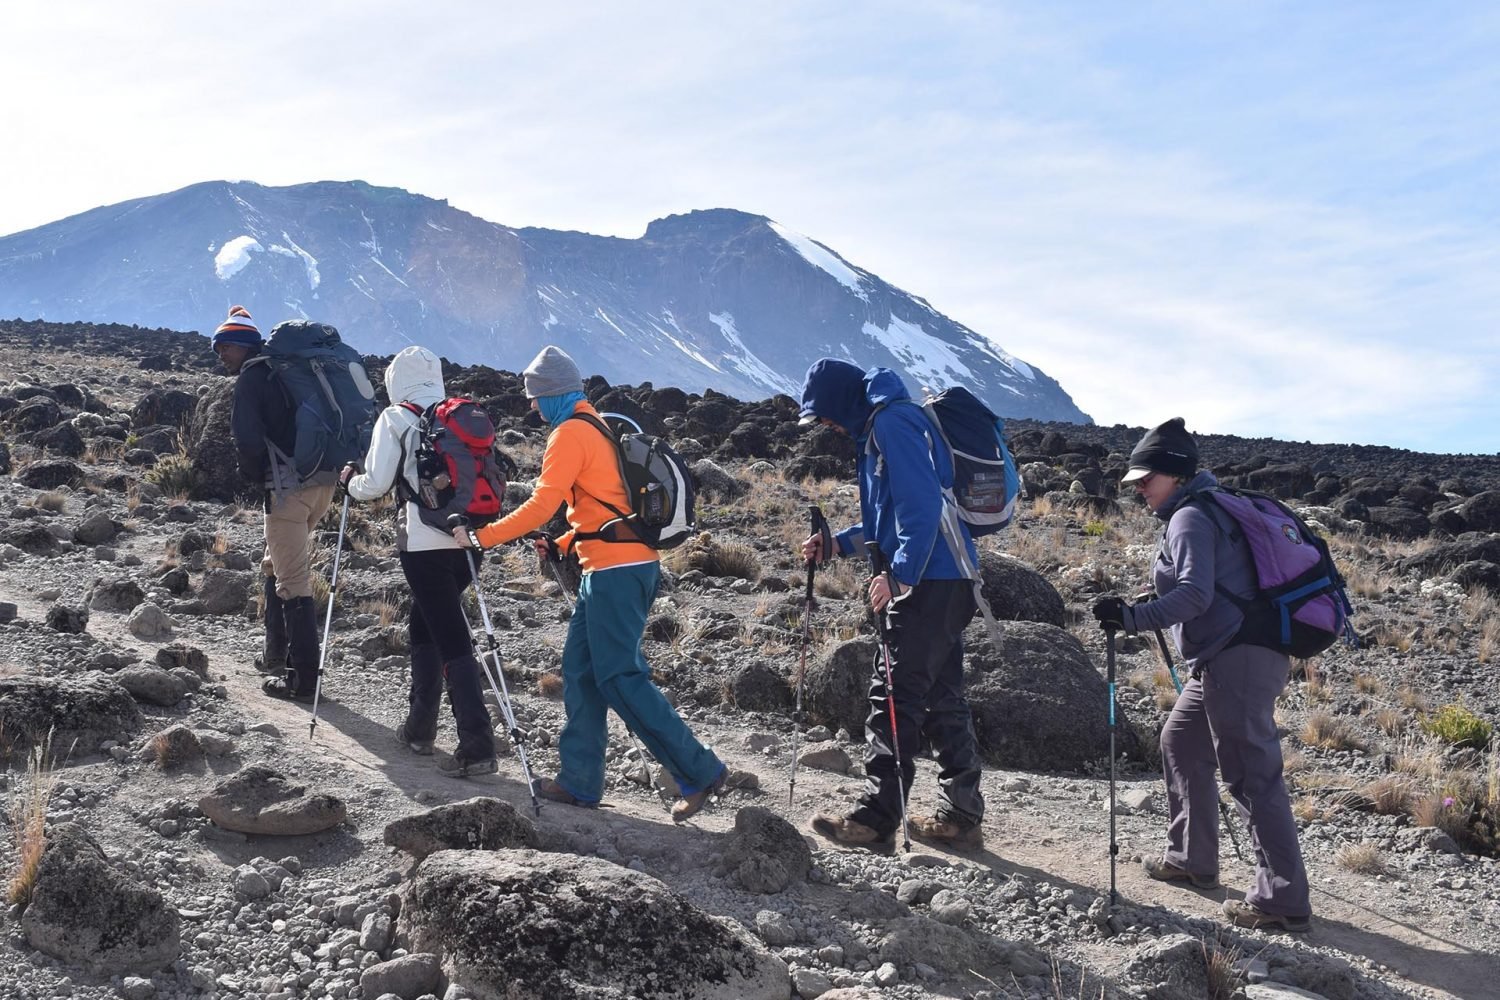 A group of climbers are trekking up the Lemosho route on Mount Kilimanjaro. They are wearing hiking gear and are carrying backpacks. The mountain is in the background and is covered in snow.